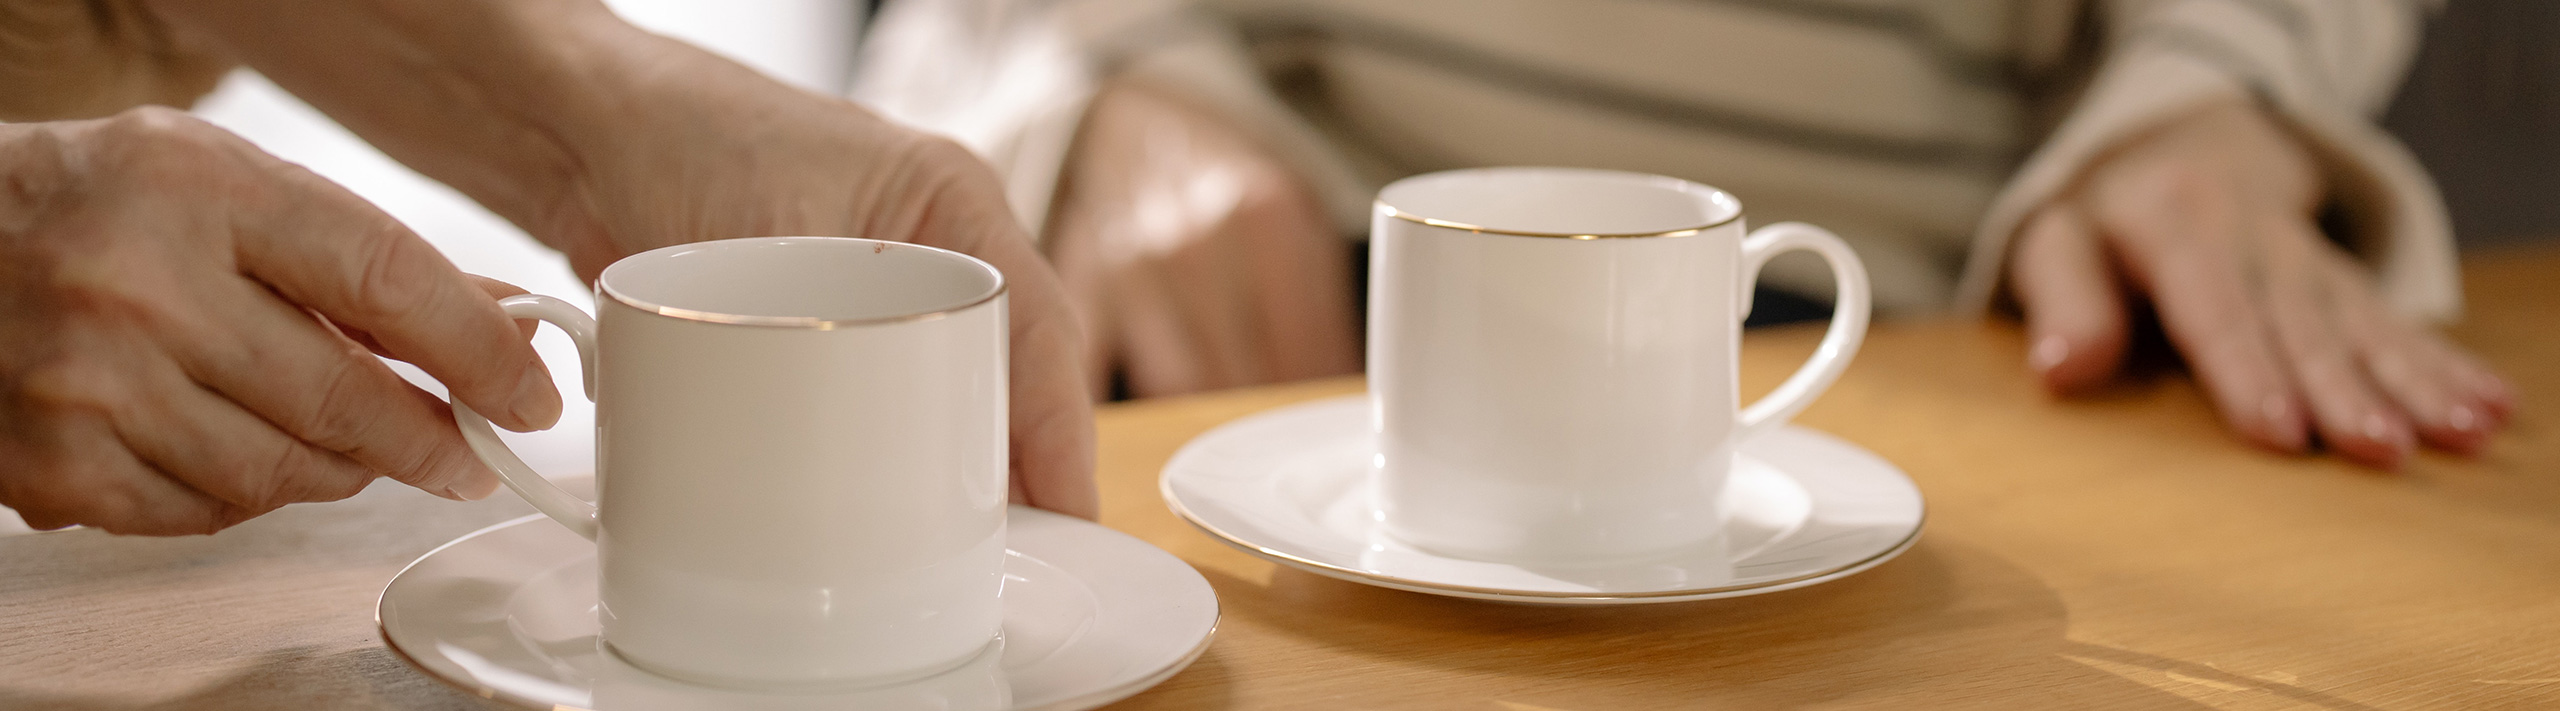 Image of two people's hands and two cups of tea sitting at a table